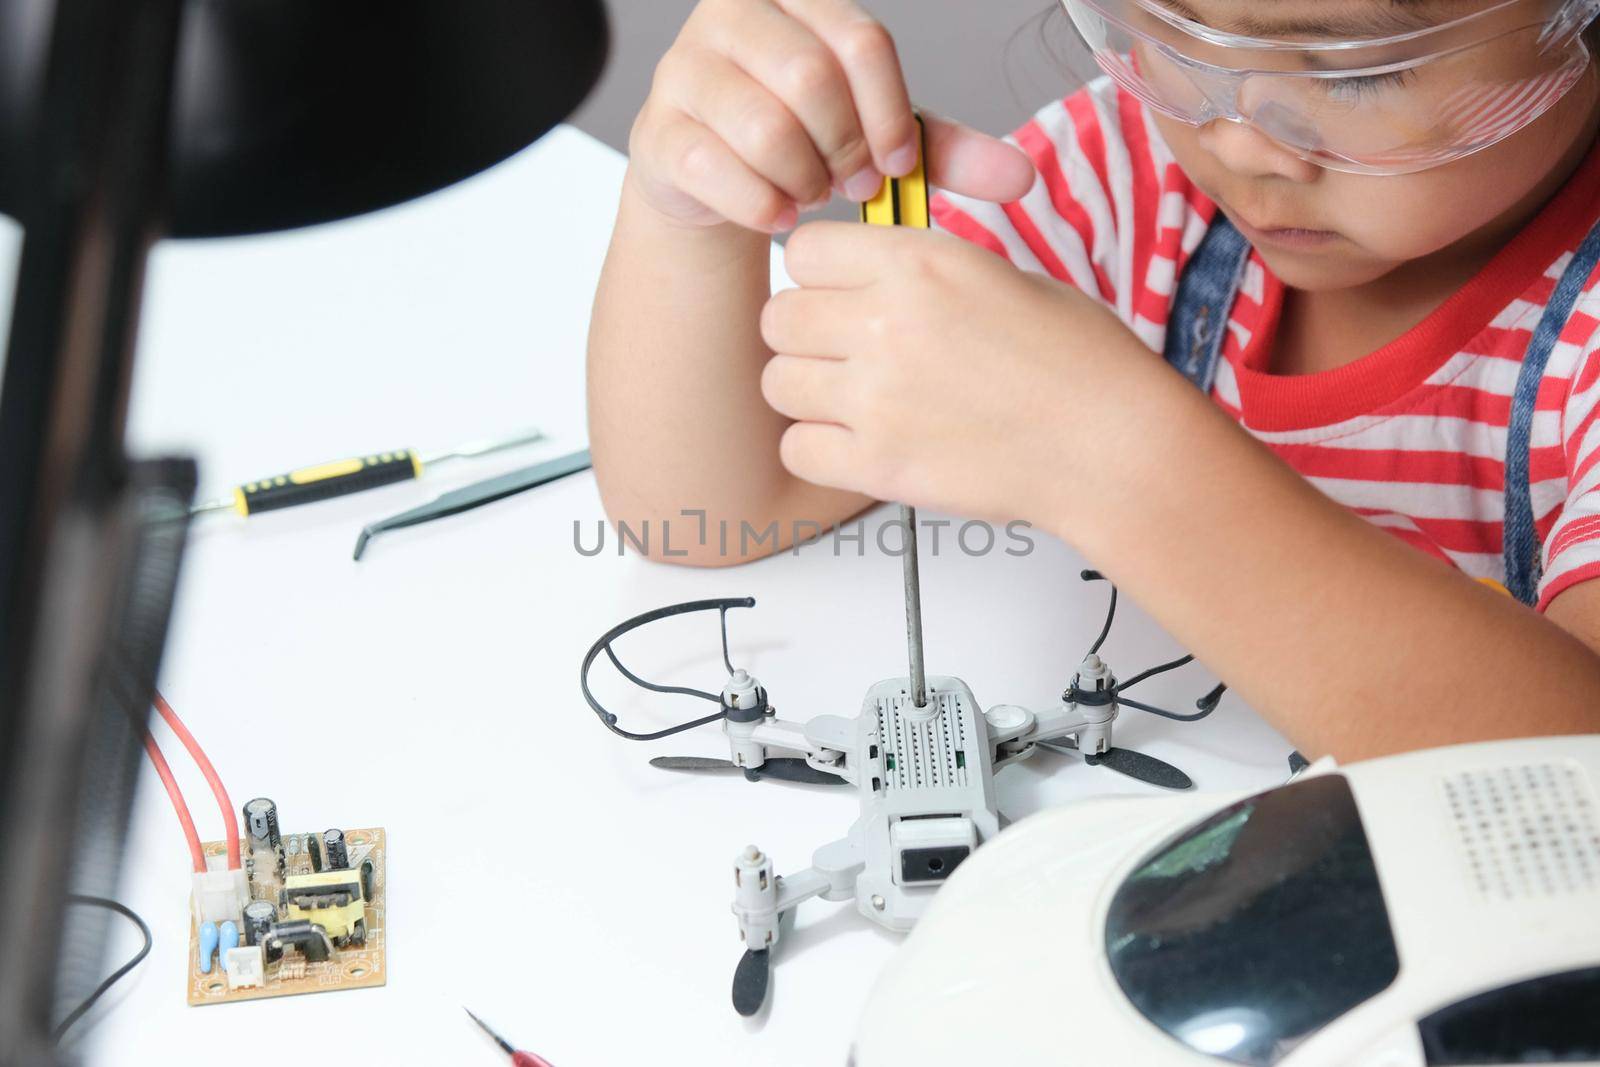 Concentrated little girl repairing her toy drone with a tool in hand and carefully assembles toy drone with screwdriver. STEM Hobbies for advanced smart kids. by TEERASAK